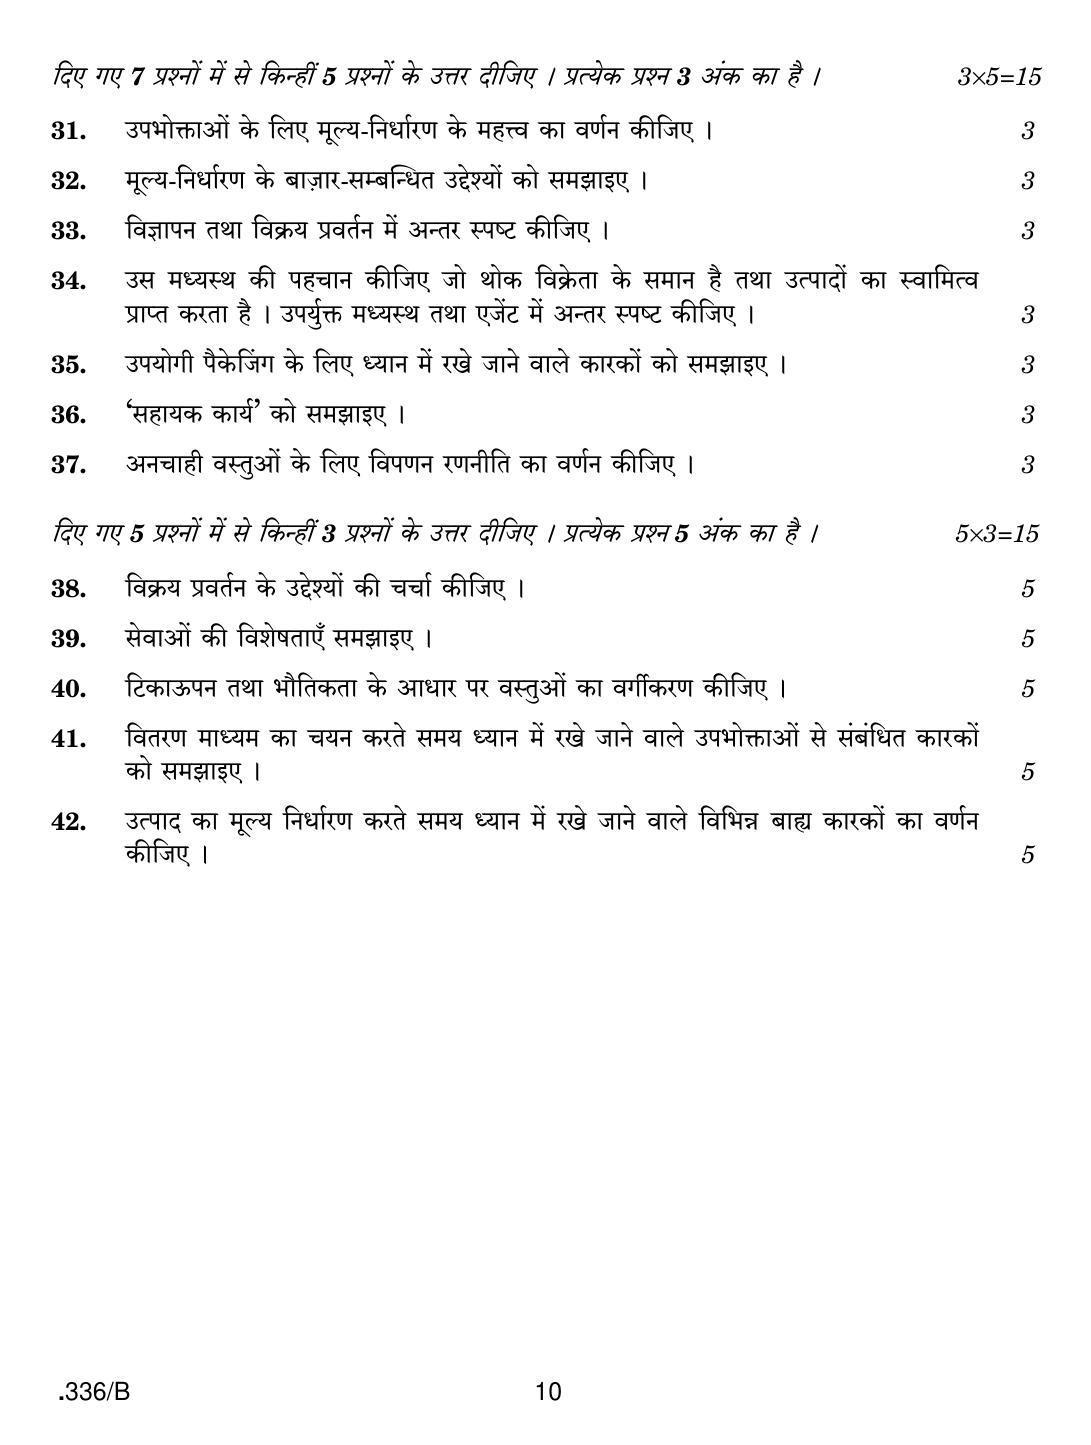 CBSE Class 12 Marketing 2020 Compartment Question Paper - Page 10